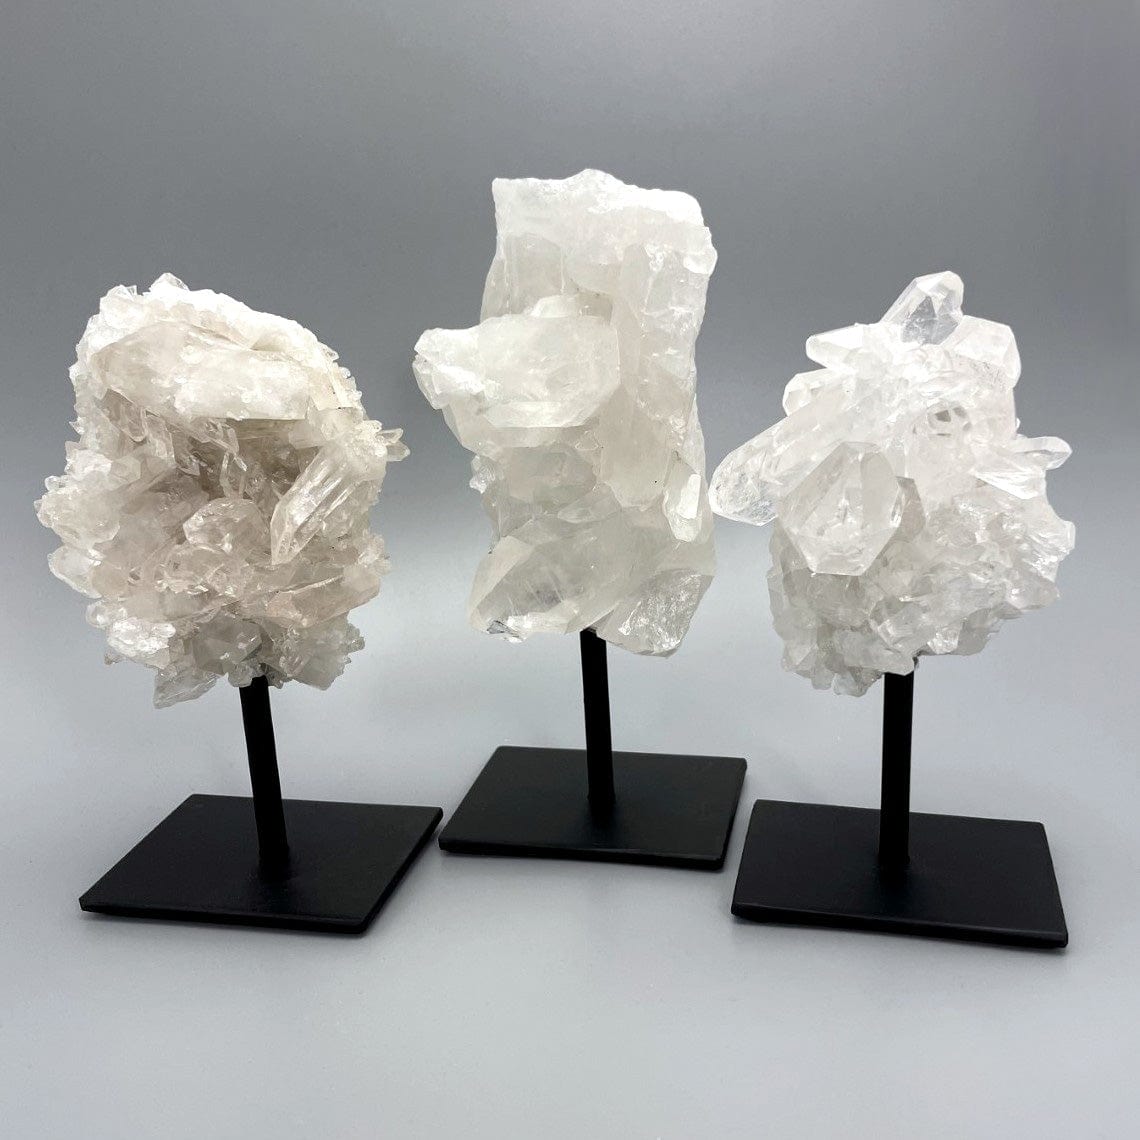 Three Crystal Quartz Cluster on metal stand, displayed on a white surface.